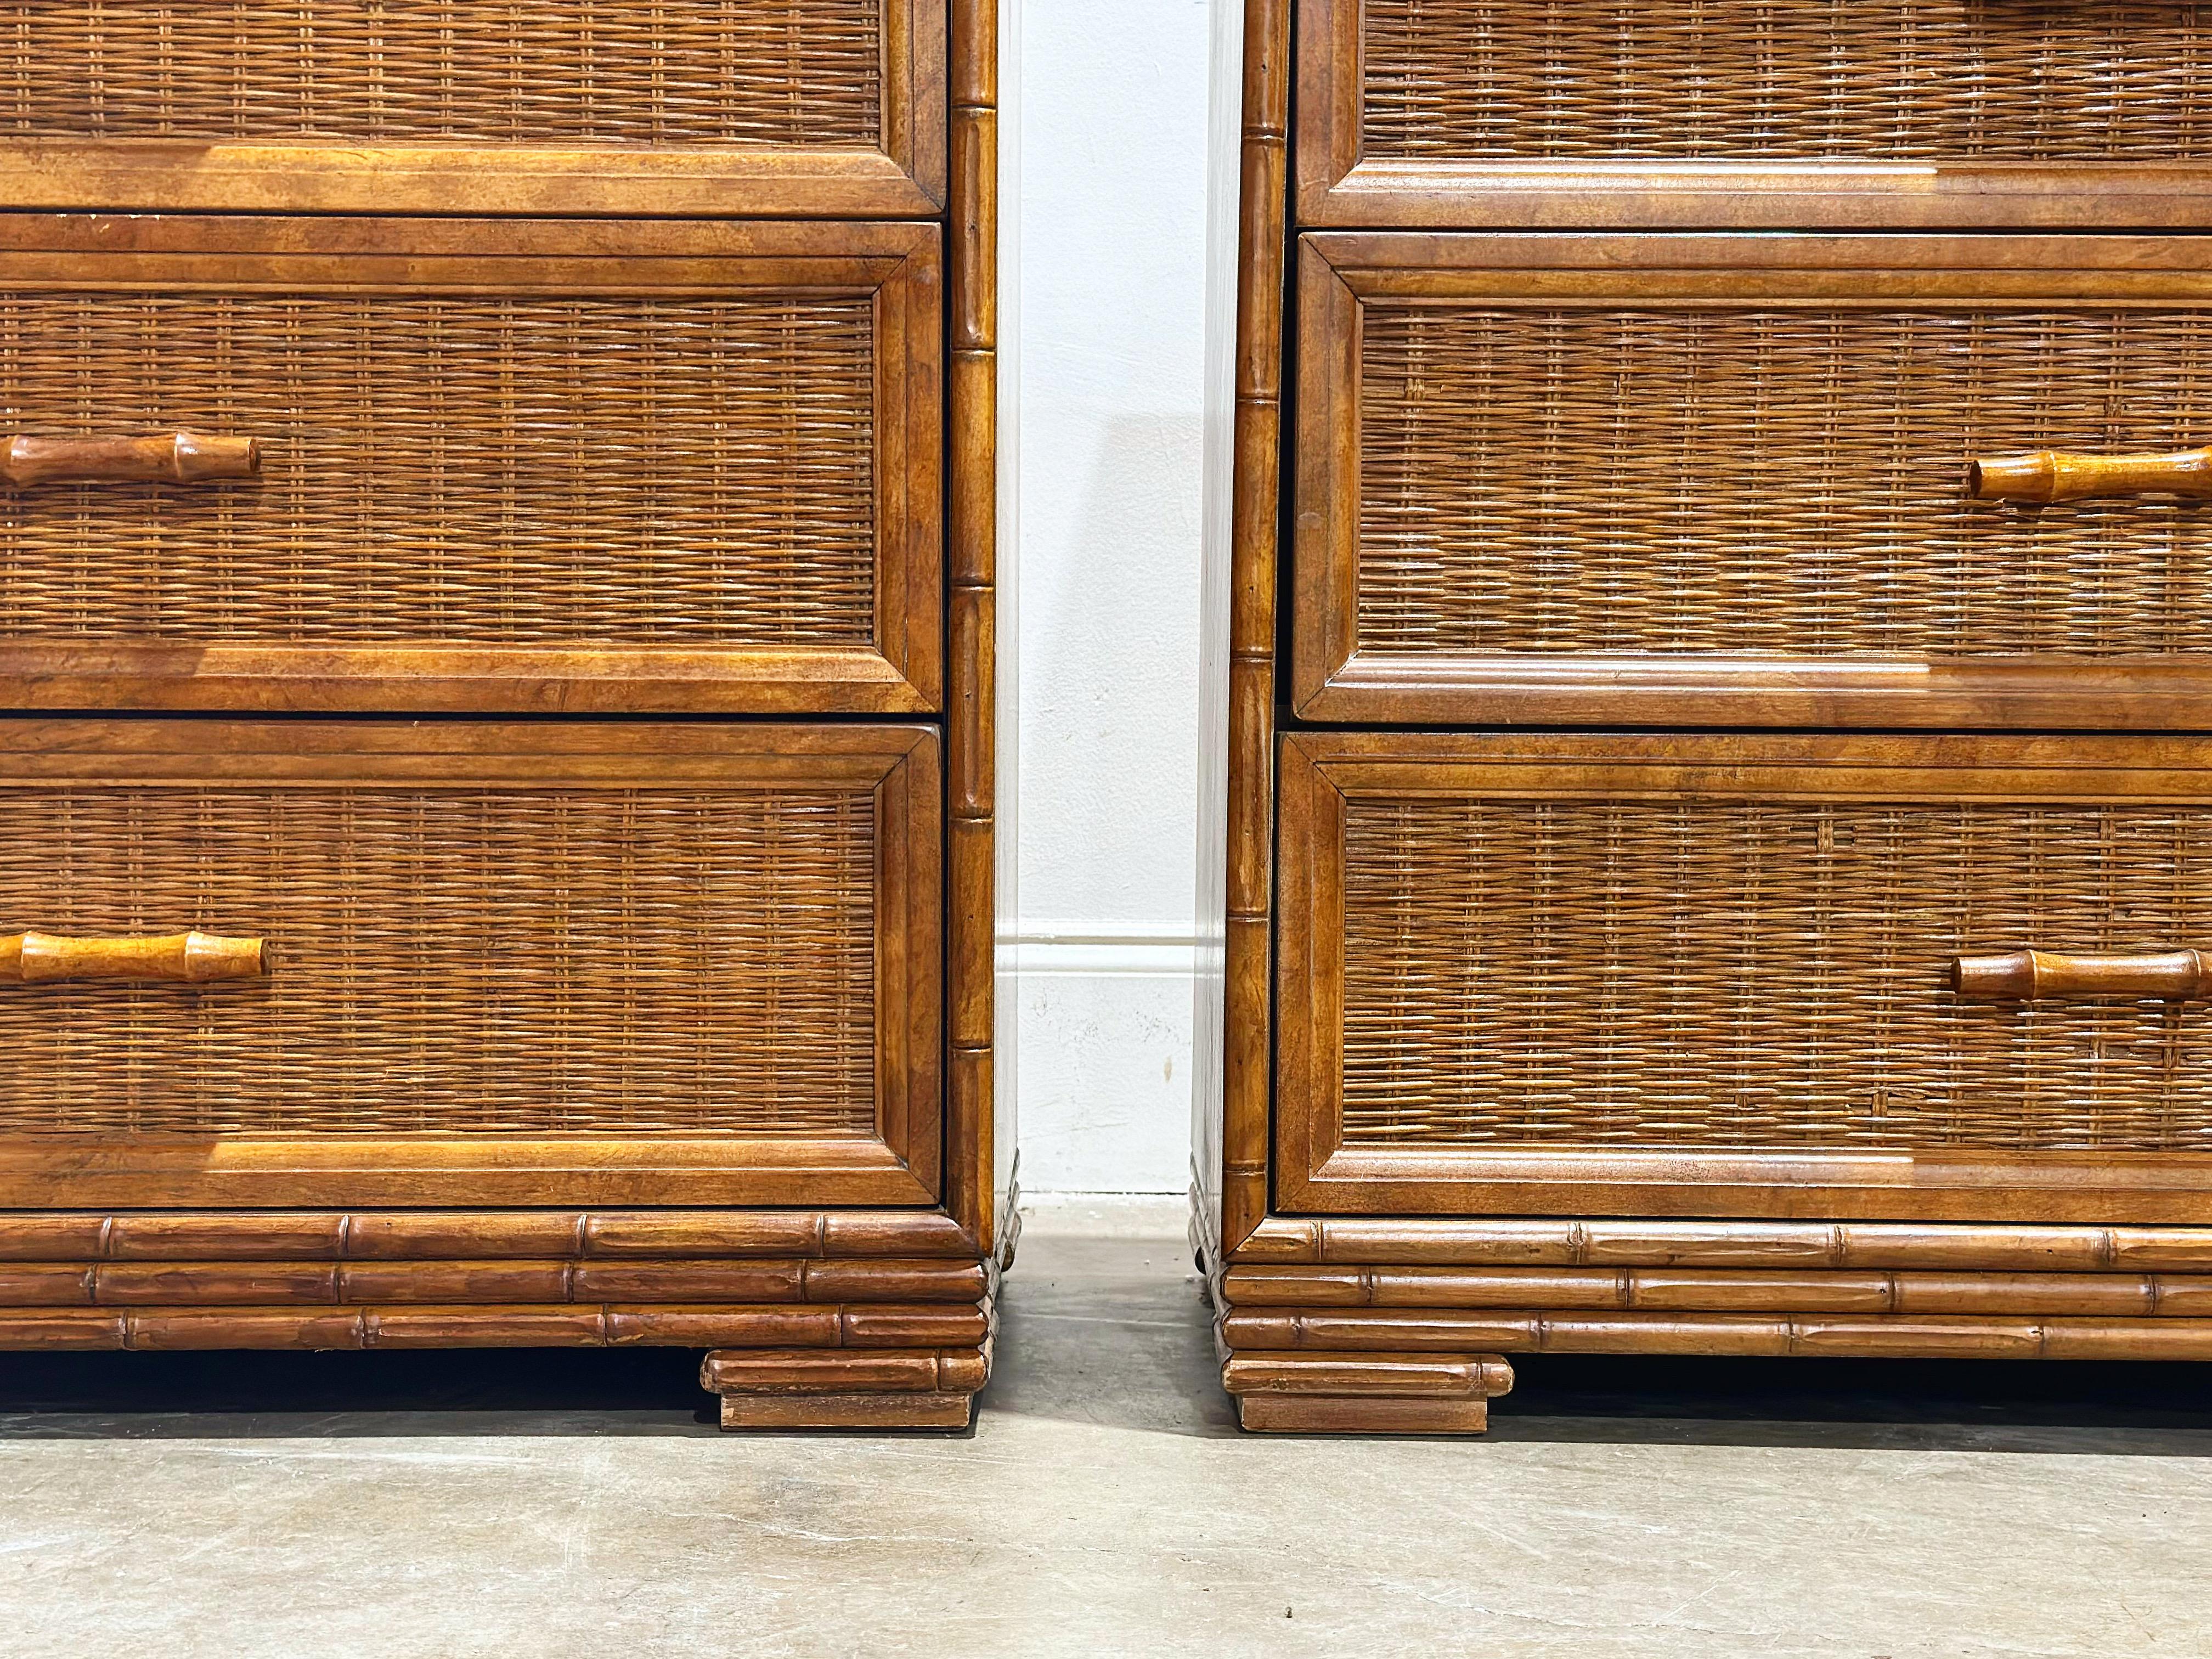 Pair of vintage organic modern bachelors chests/nightstands in rattan, birch and woven cane. Produced in the mid-1970s by American of Martinsville. Well-built with quality materials and stellar American craftsmanship.
Excellent overall condition -